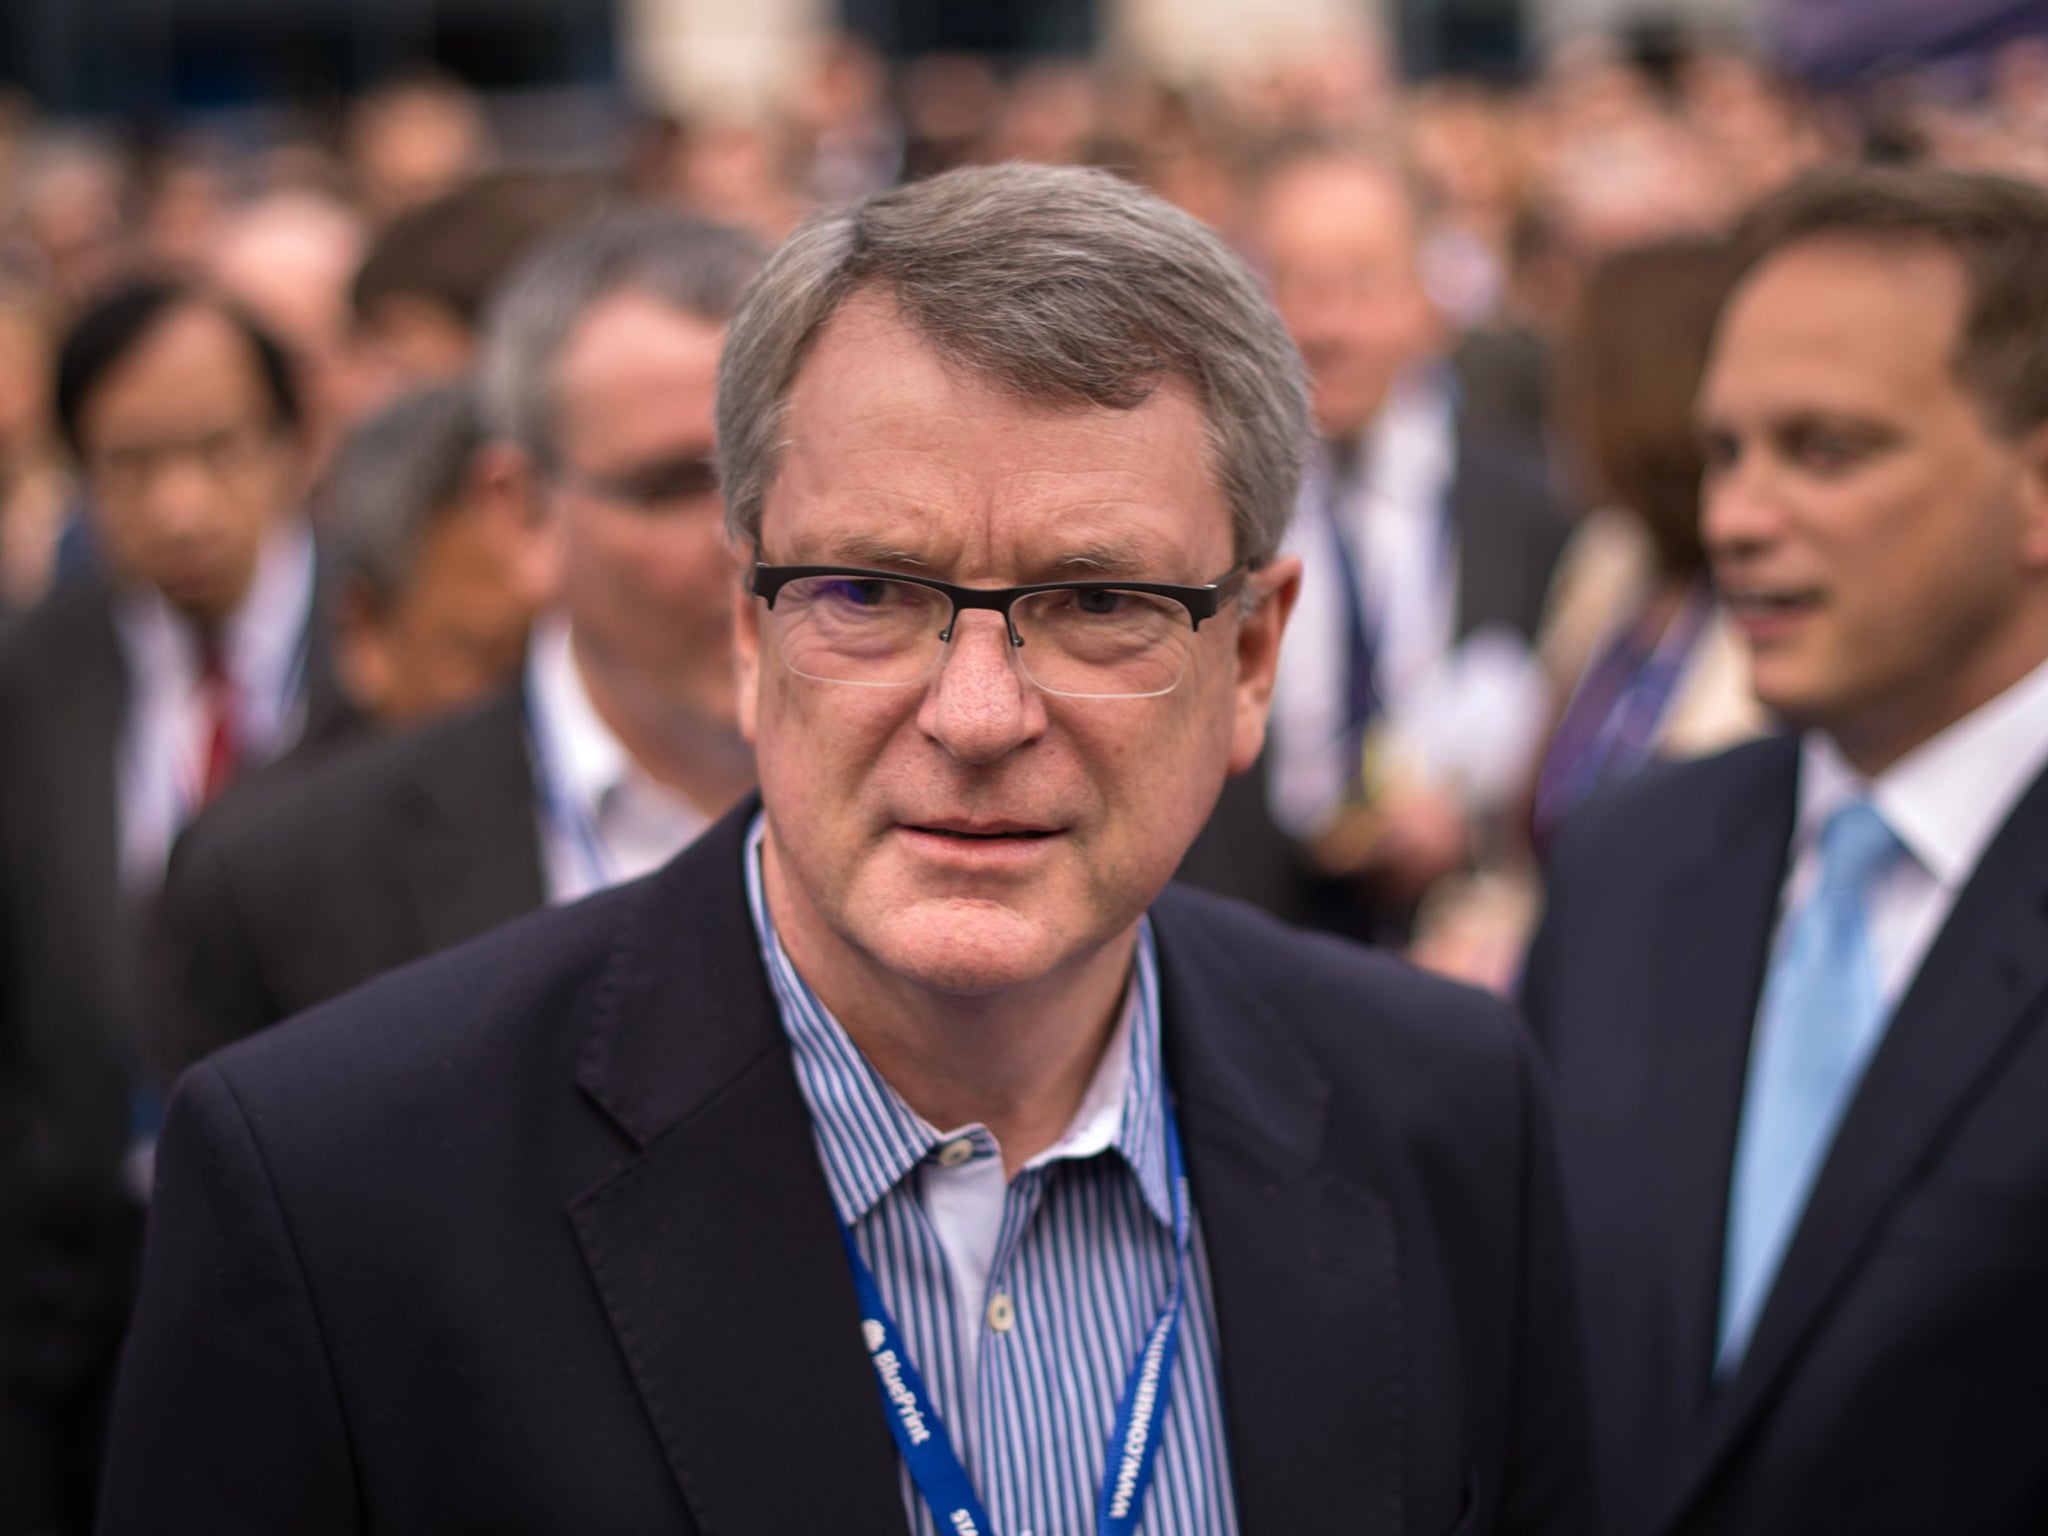 Lynton Crosby, the Tories’ election strategist, the party has been attempting to narrow its focus to core issues